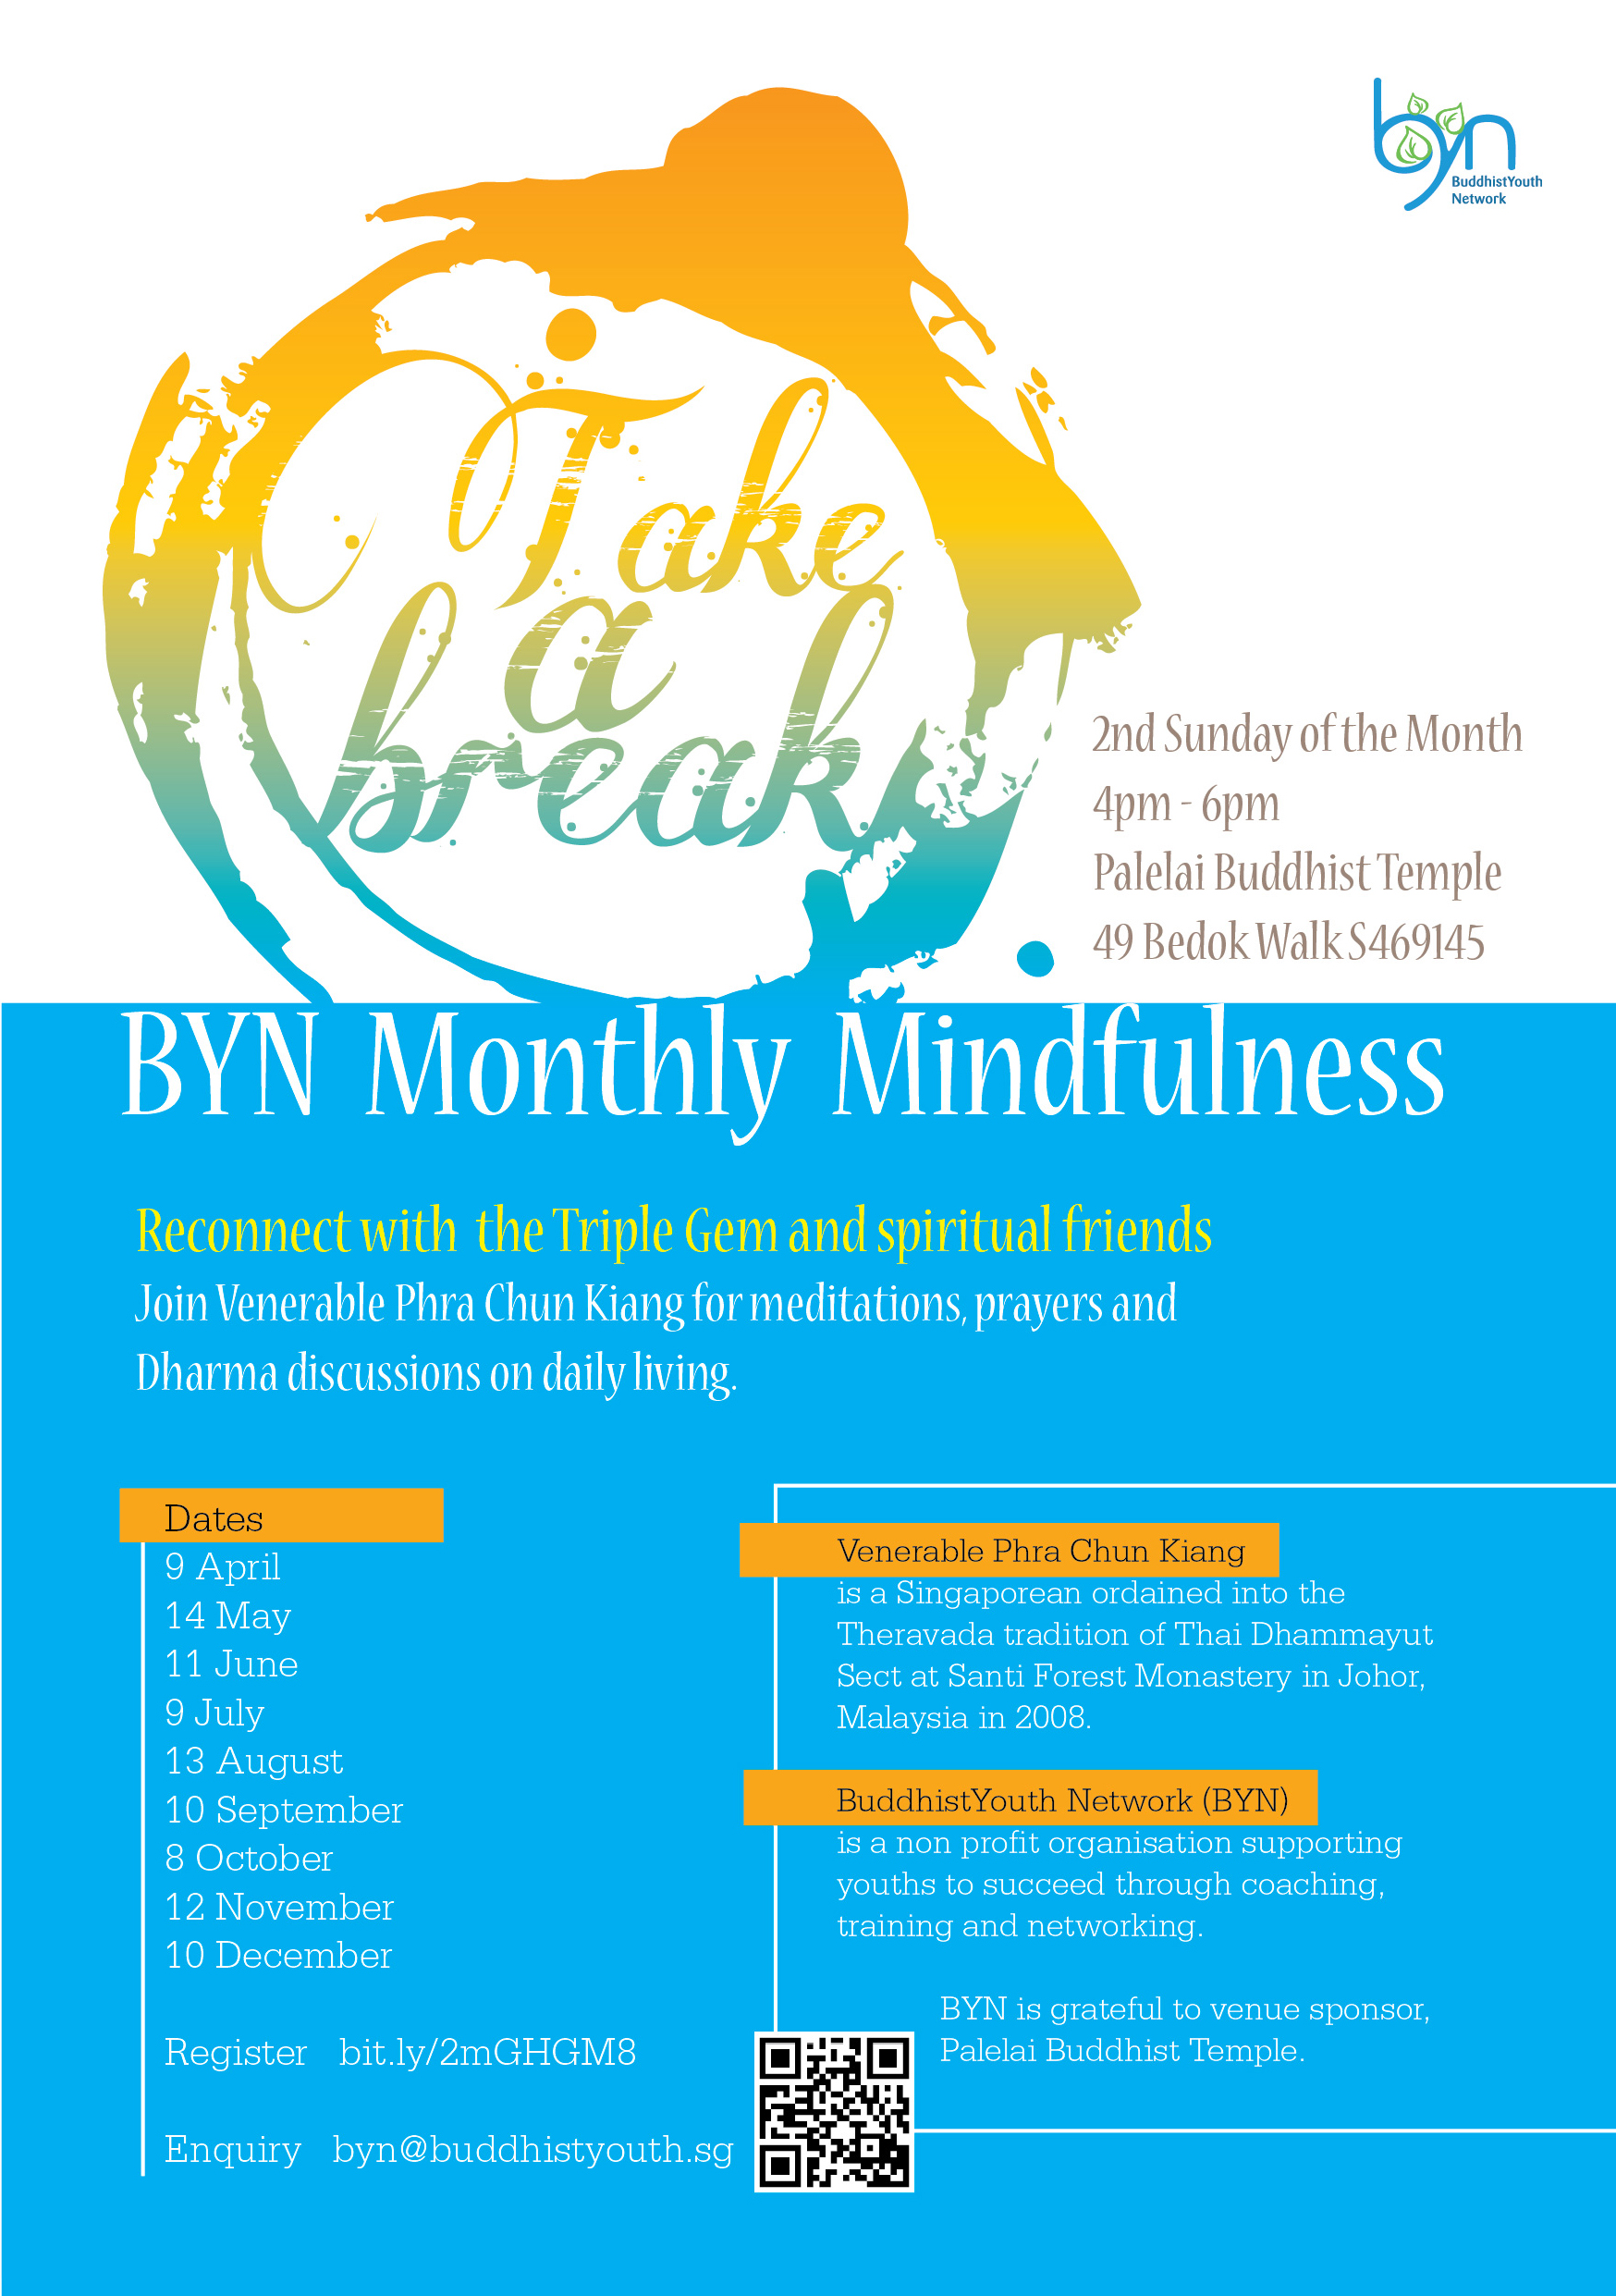 BYN Monthly Mindfulness – give your mind a break (second Sundays)